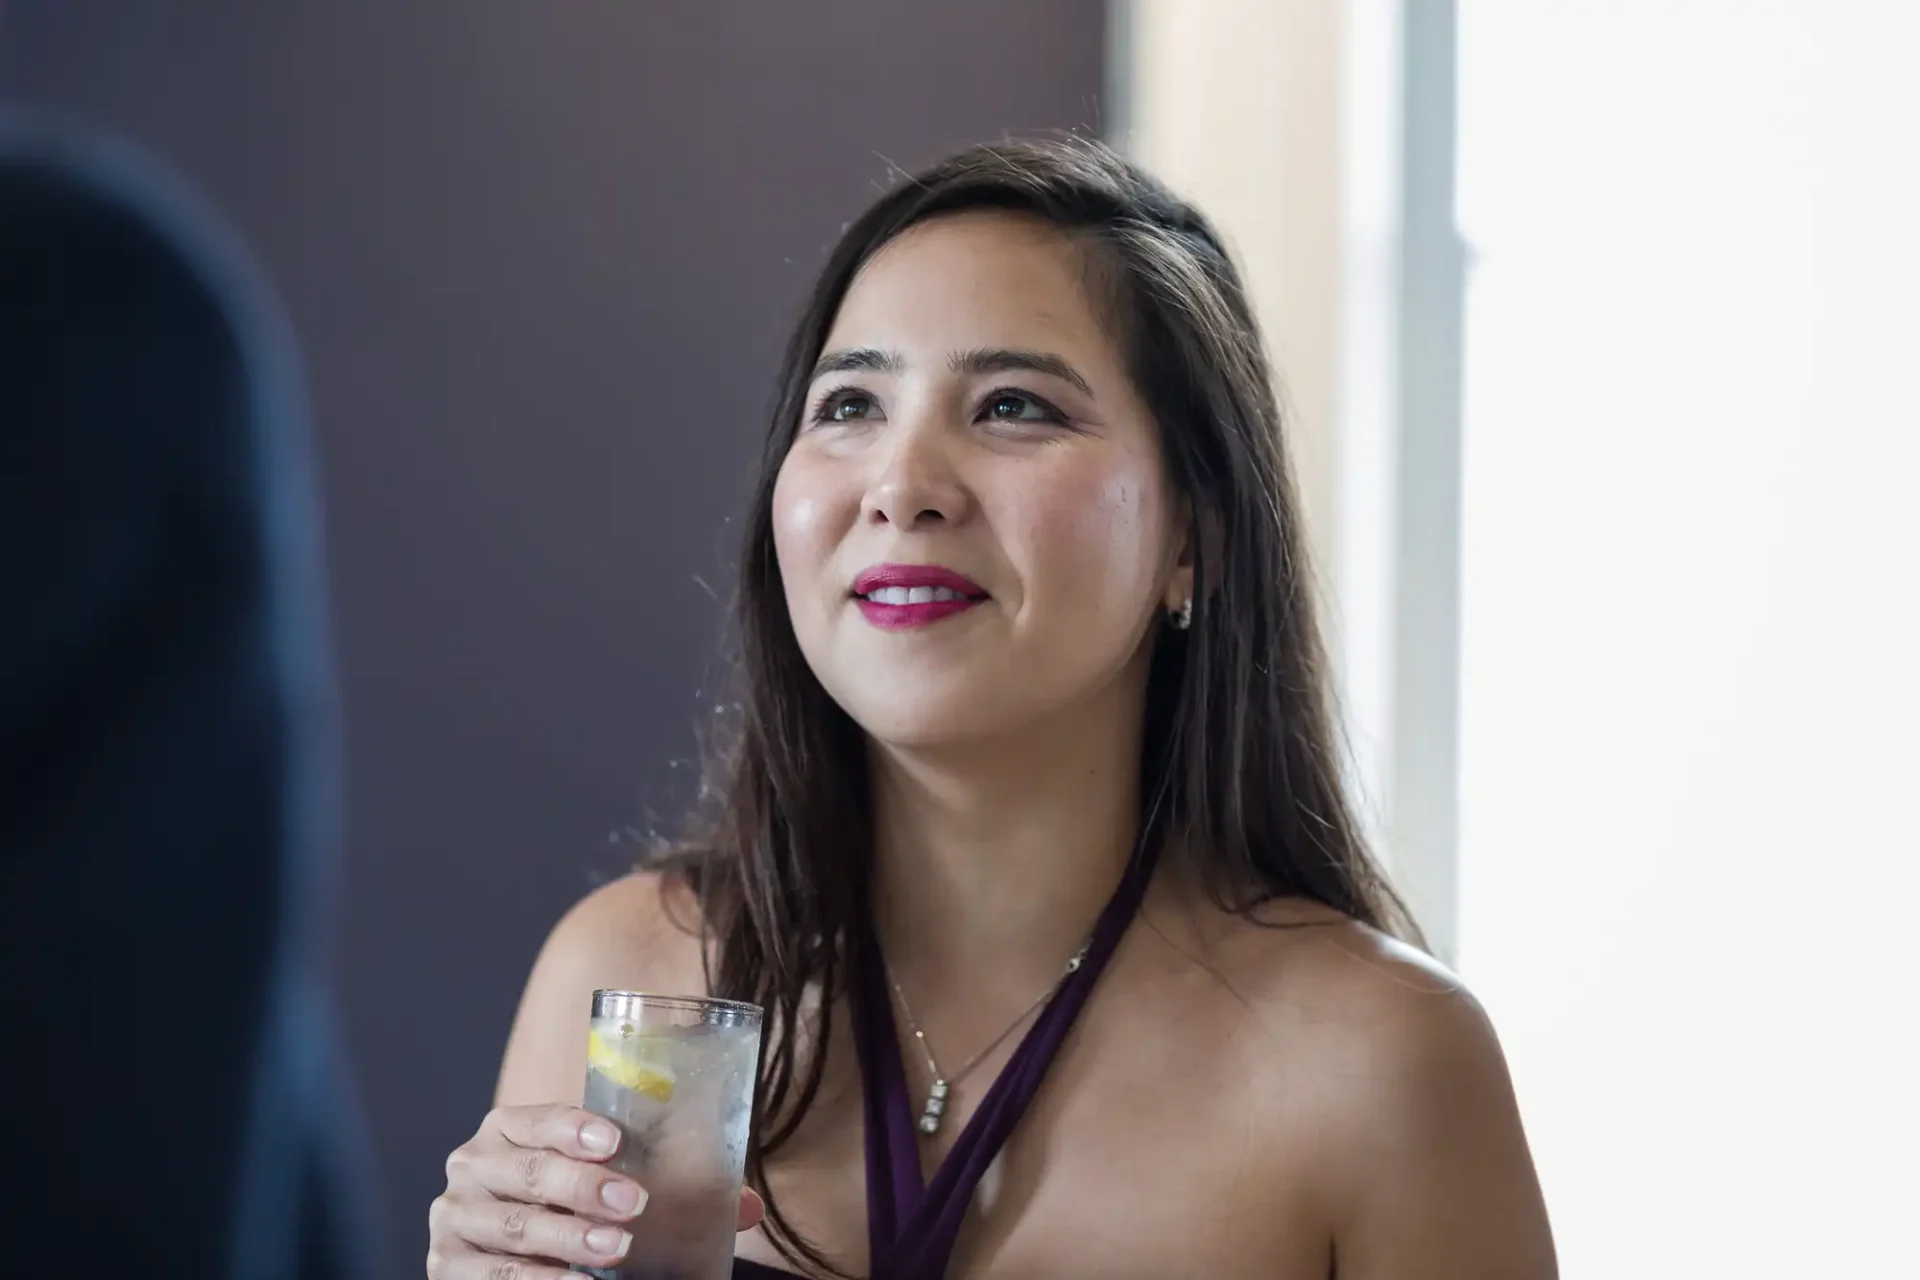 Woman holding a glass, smiling and looking up, engaged in conversation at a social event.